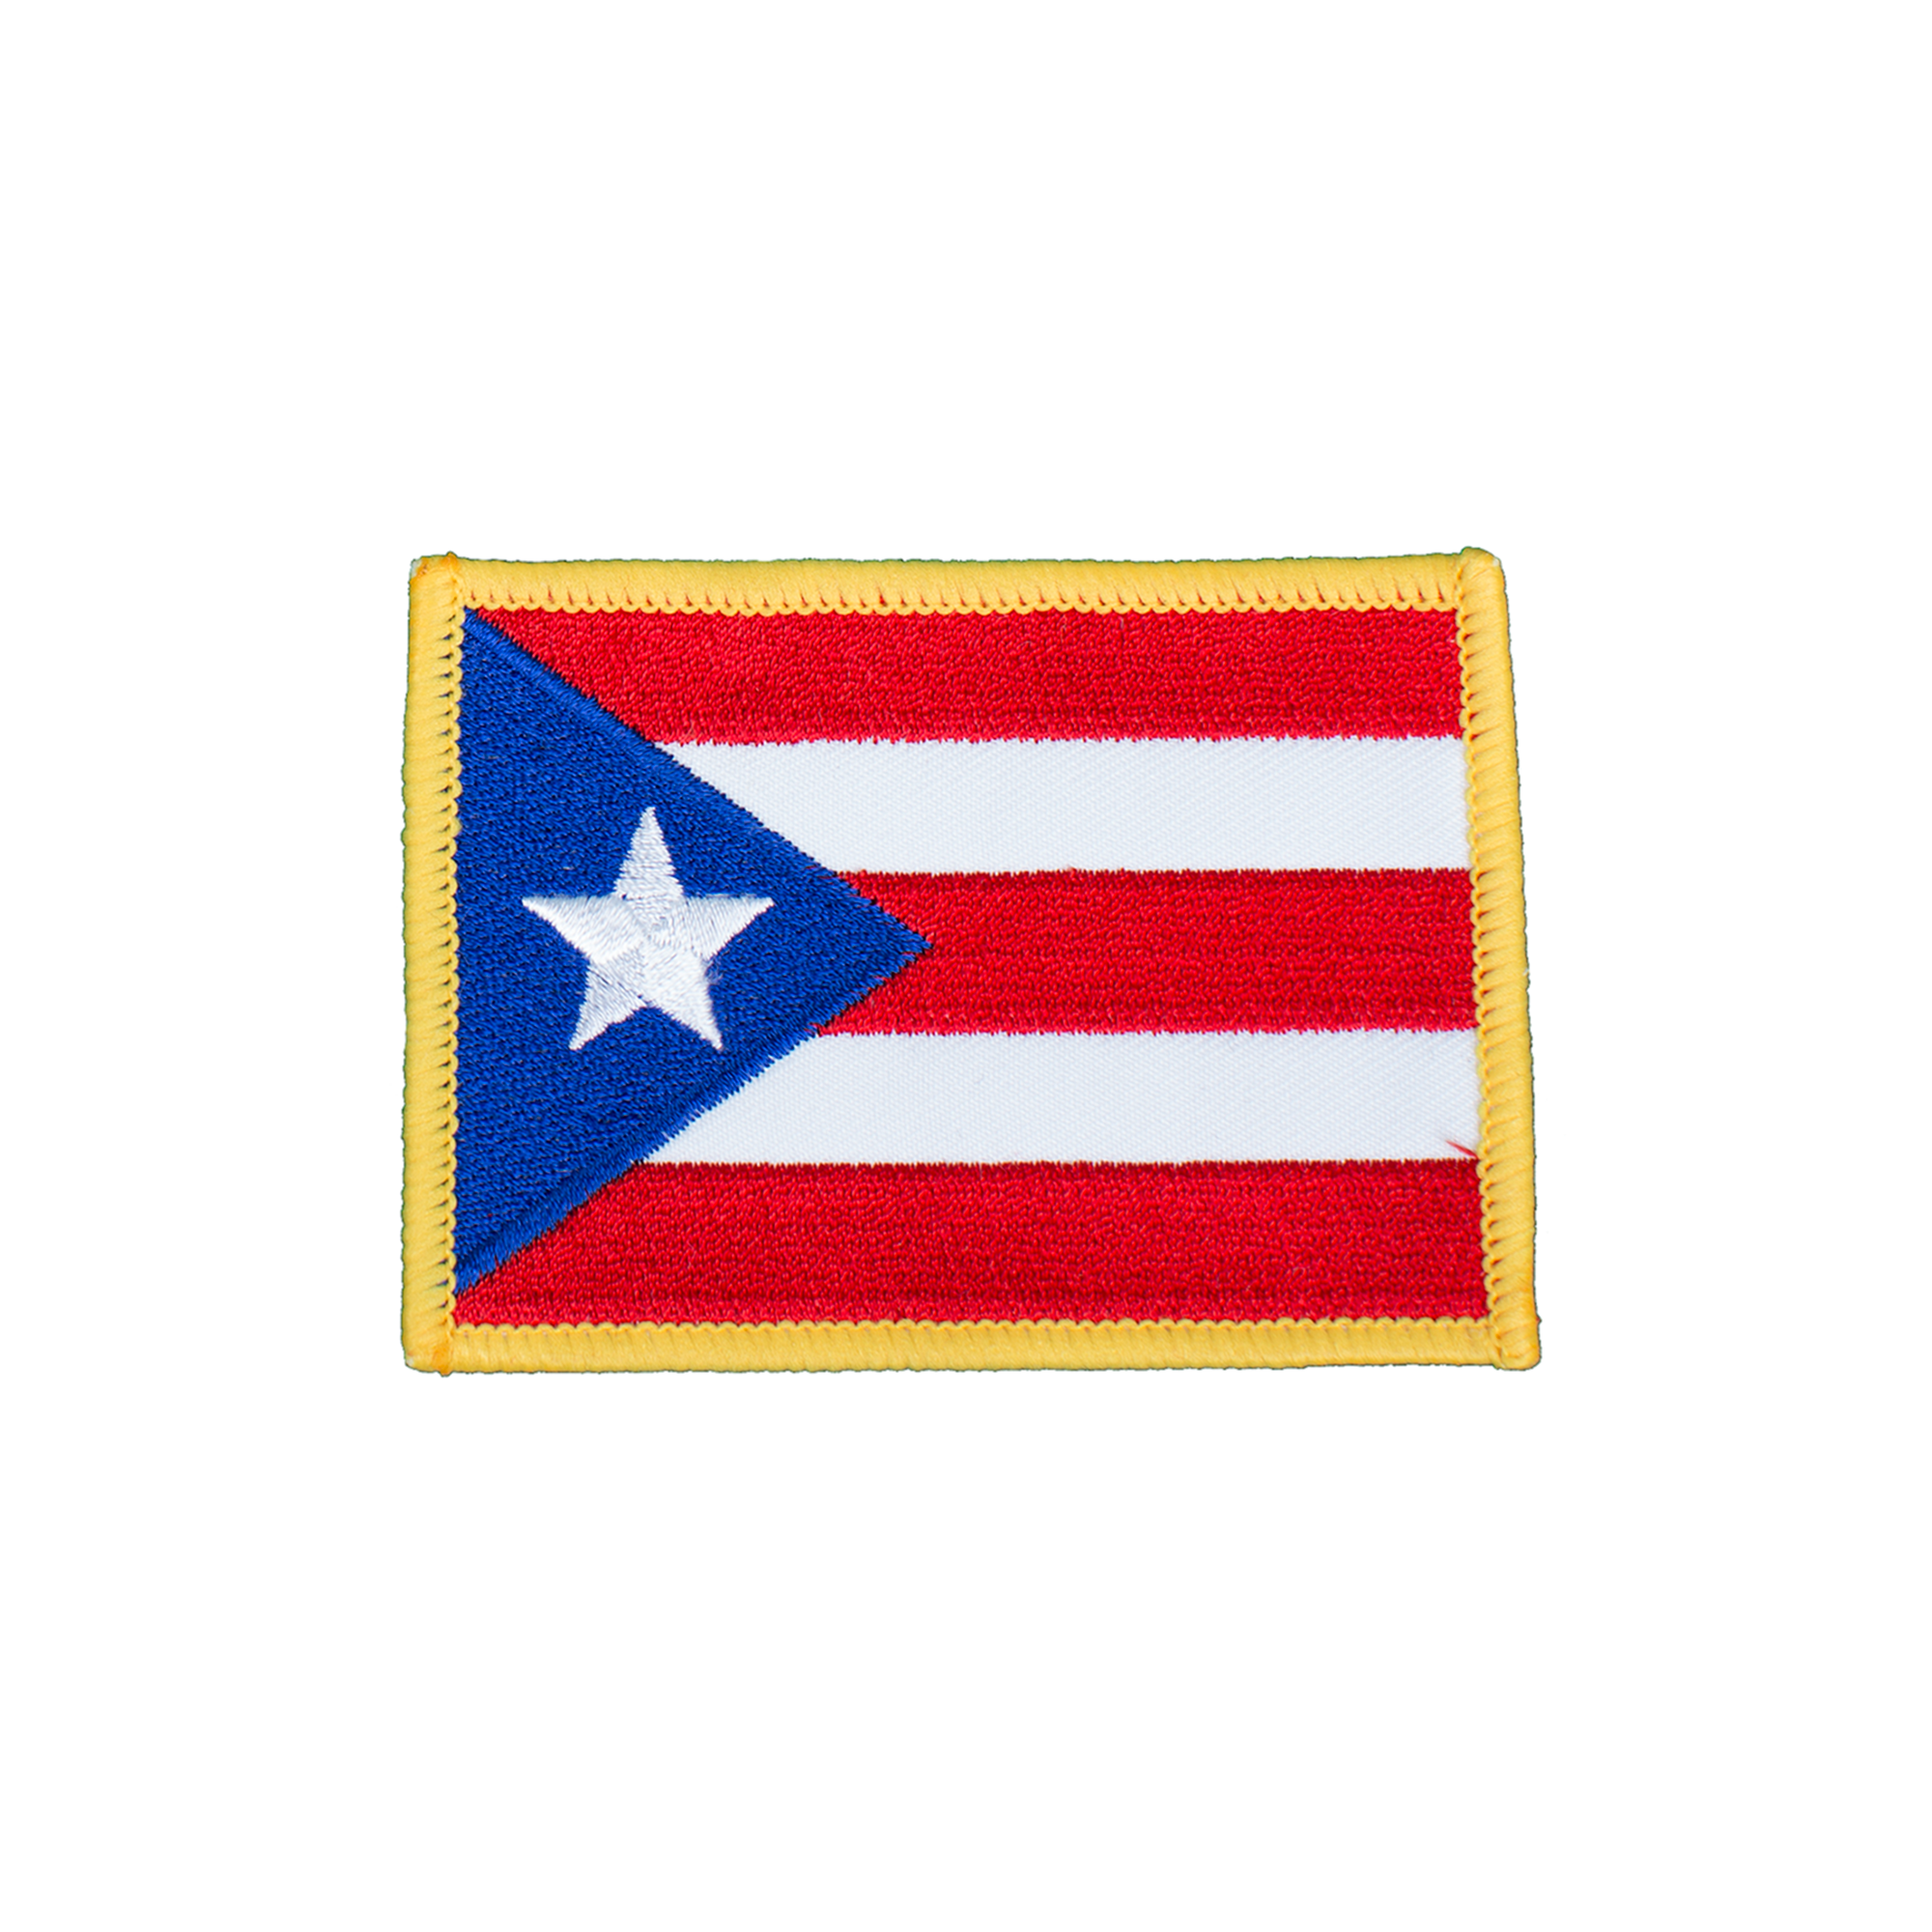 Philippines Flag Patch - Best Martial Arts / MOOTO USA